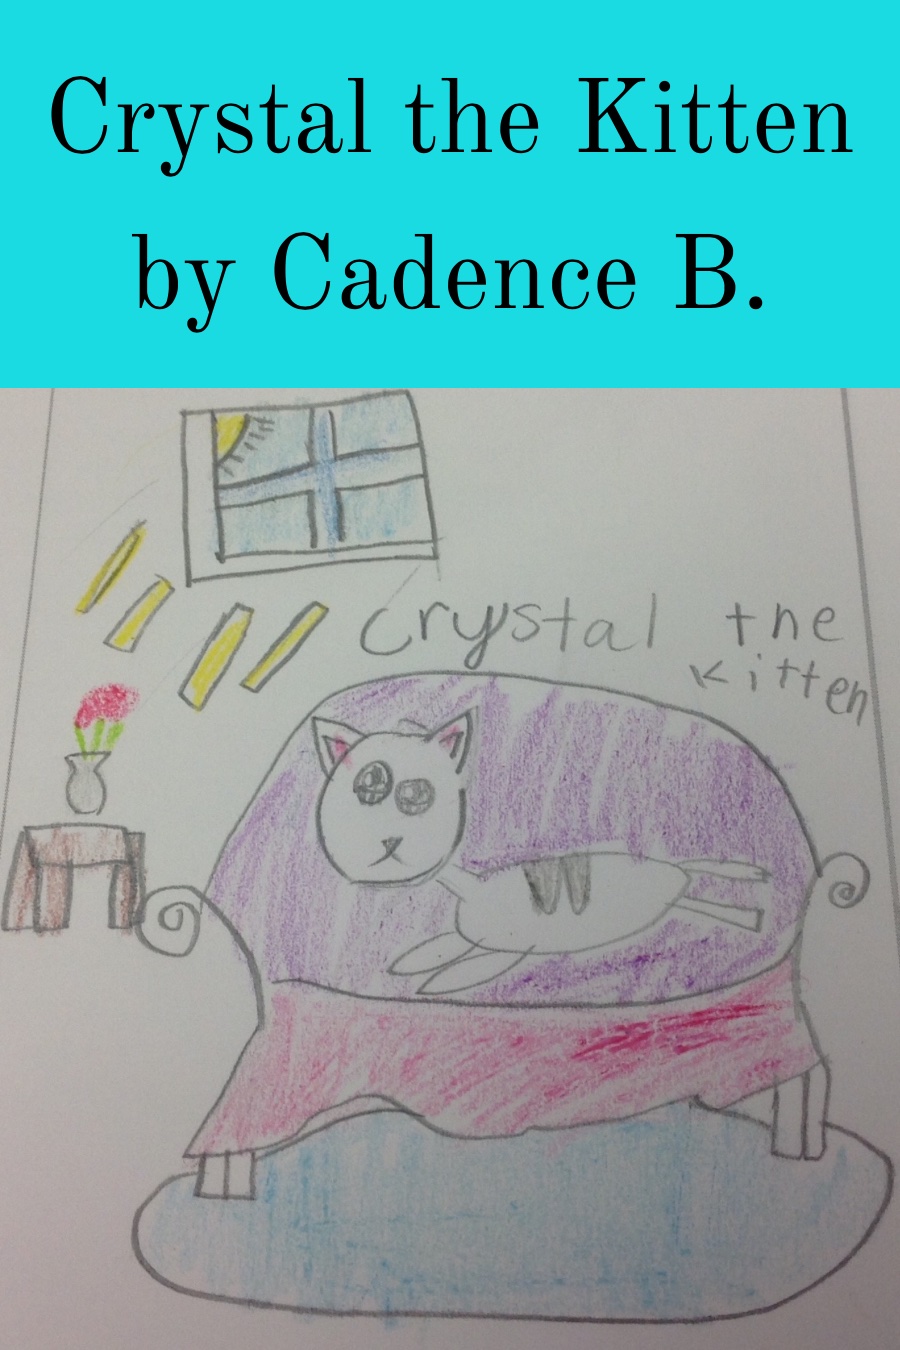 Crystal the Kitten by Cadence B